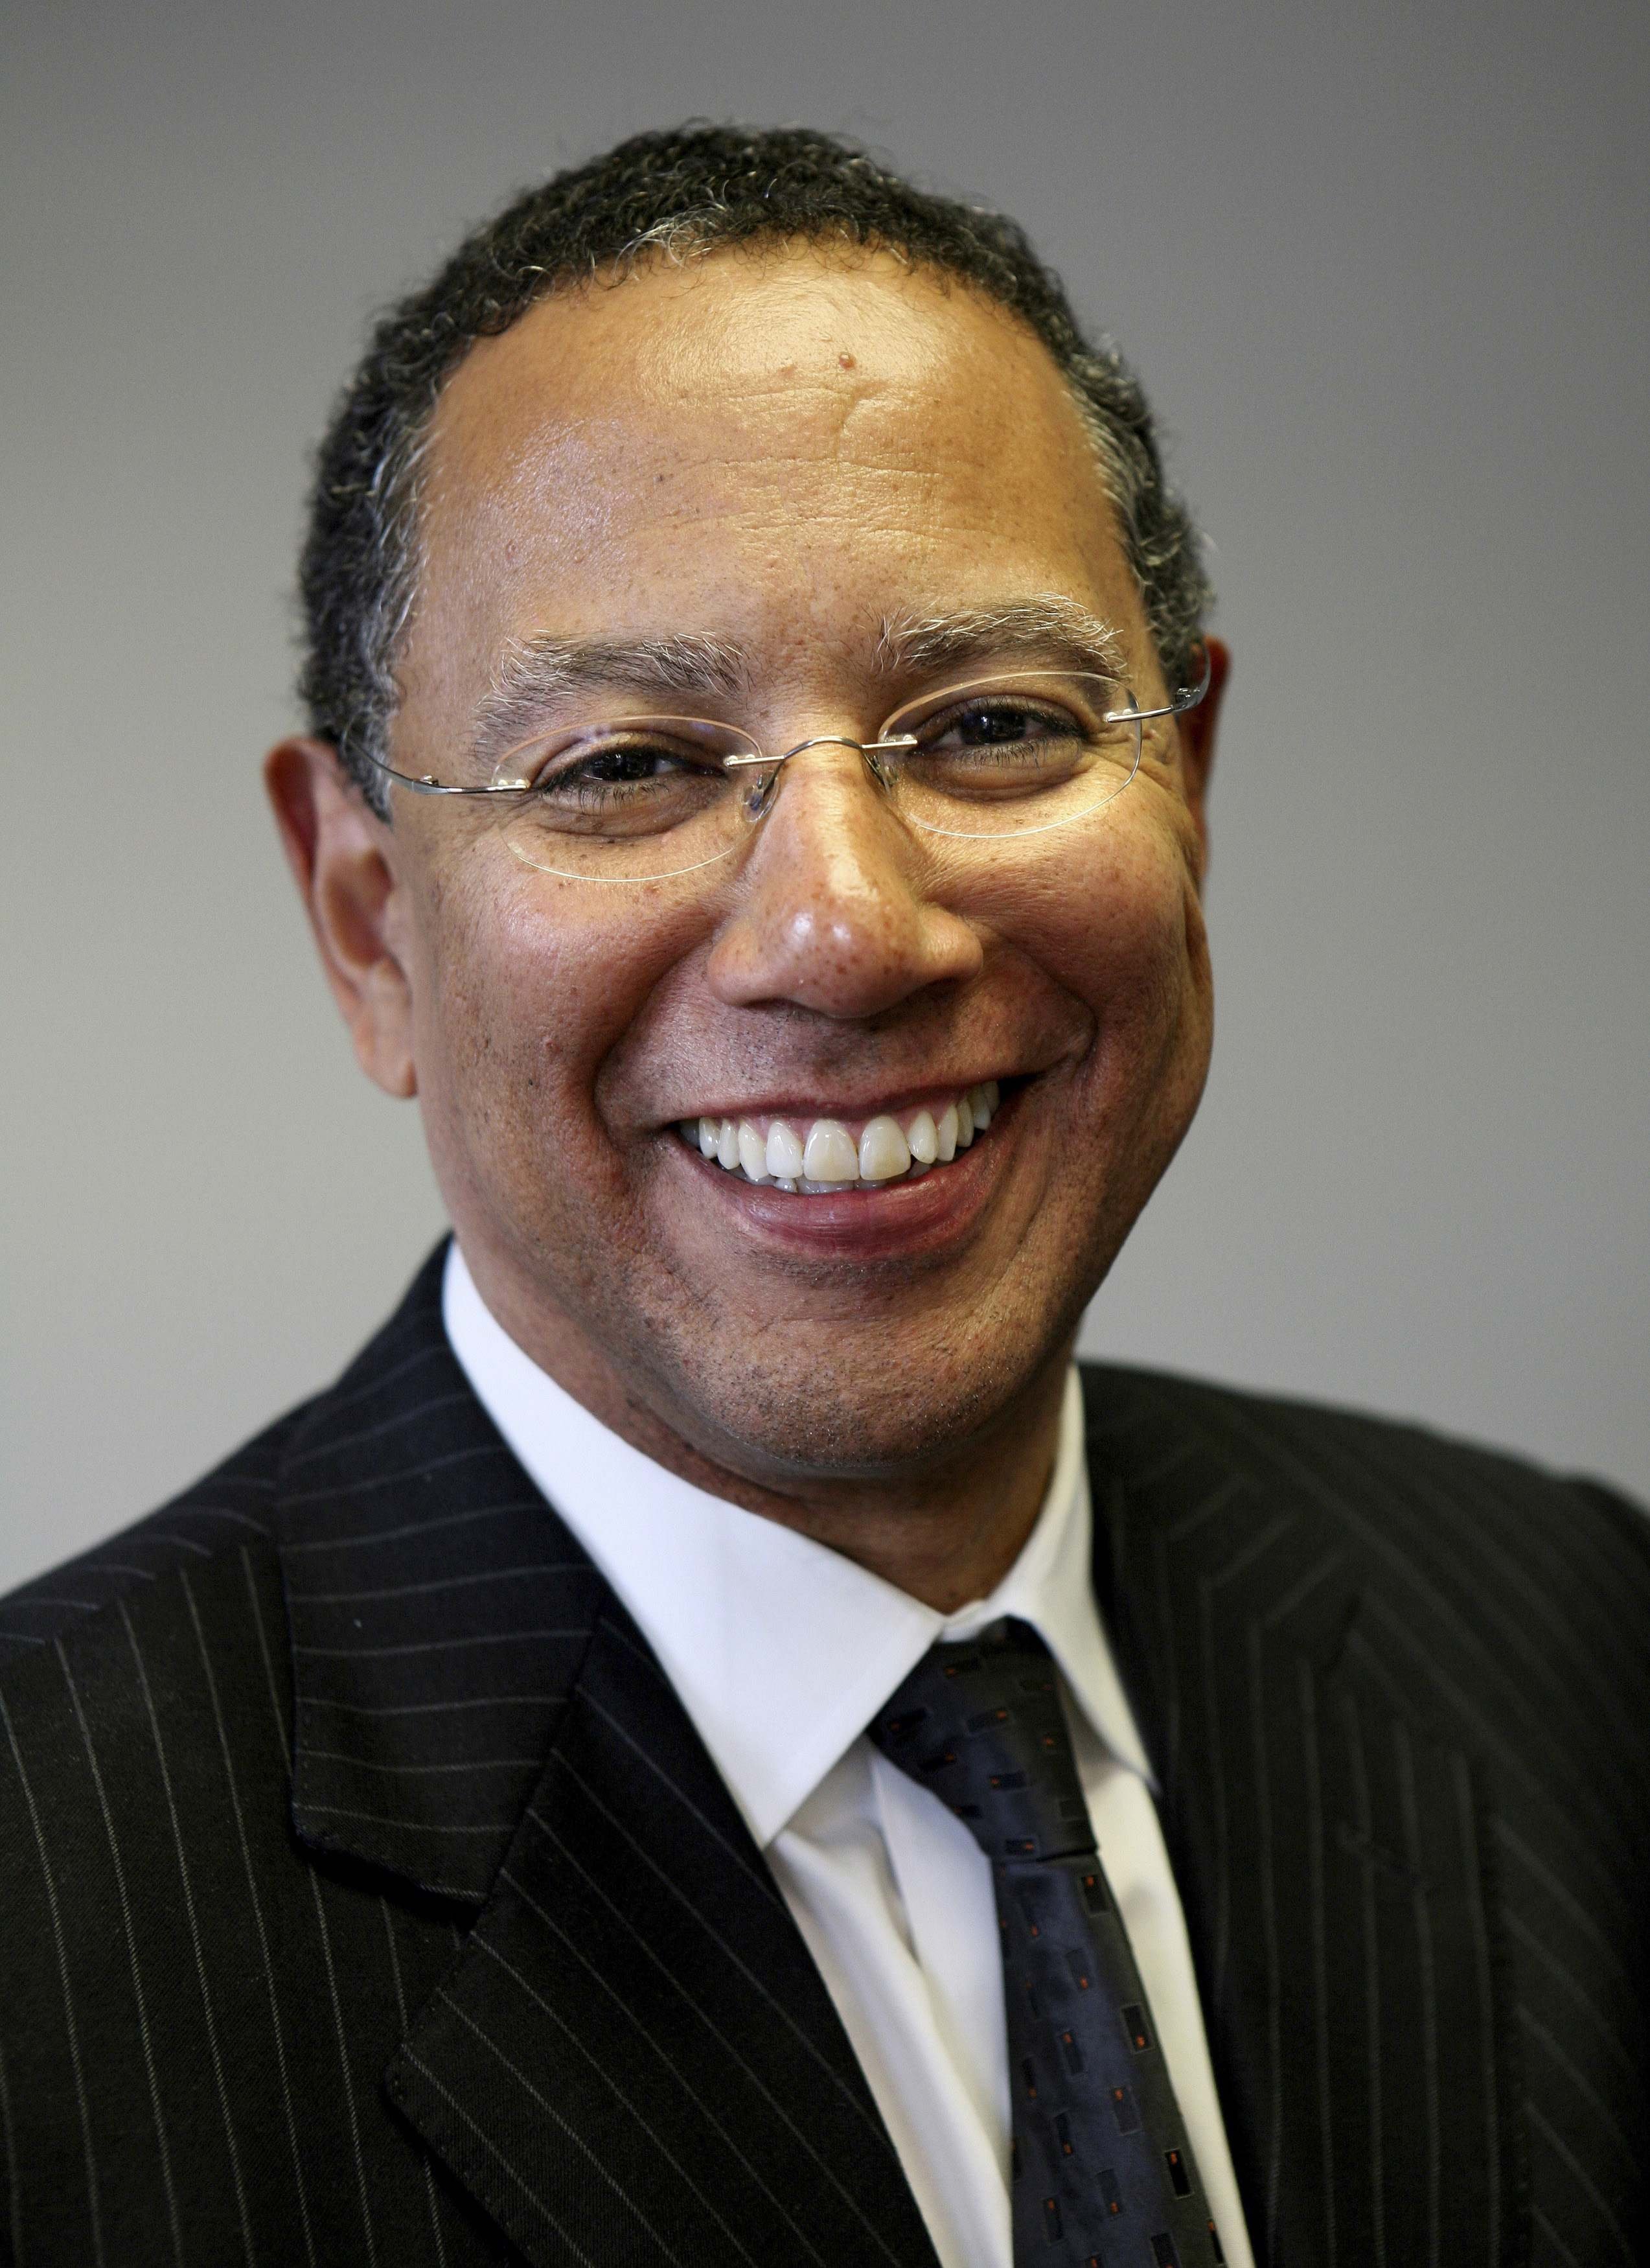 Managing Editor Dean Baquet is shown in this handout photo provided by the New York Times on May 14, 2014. (Reuters)